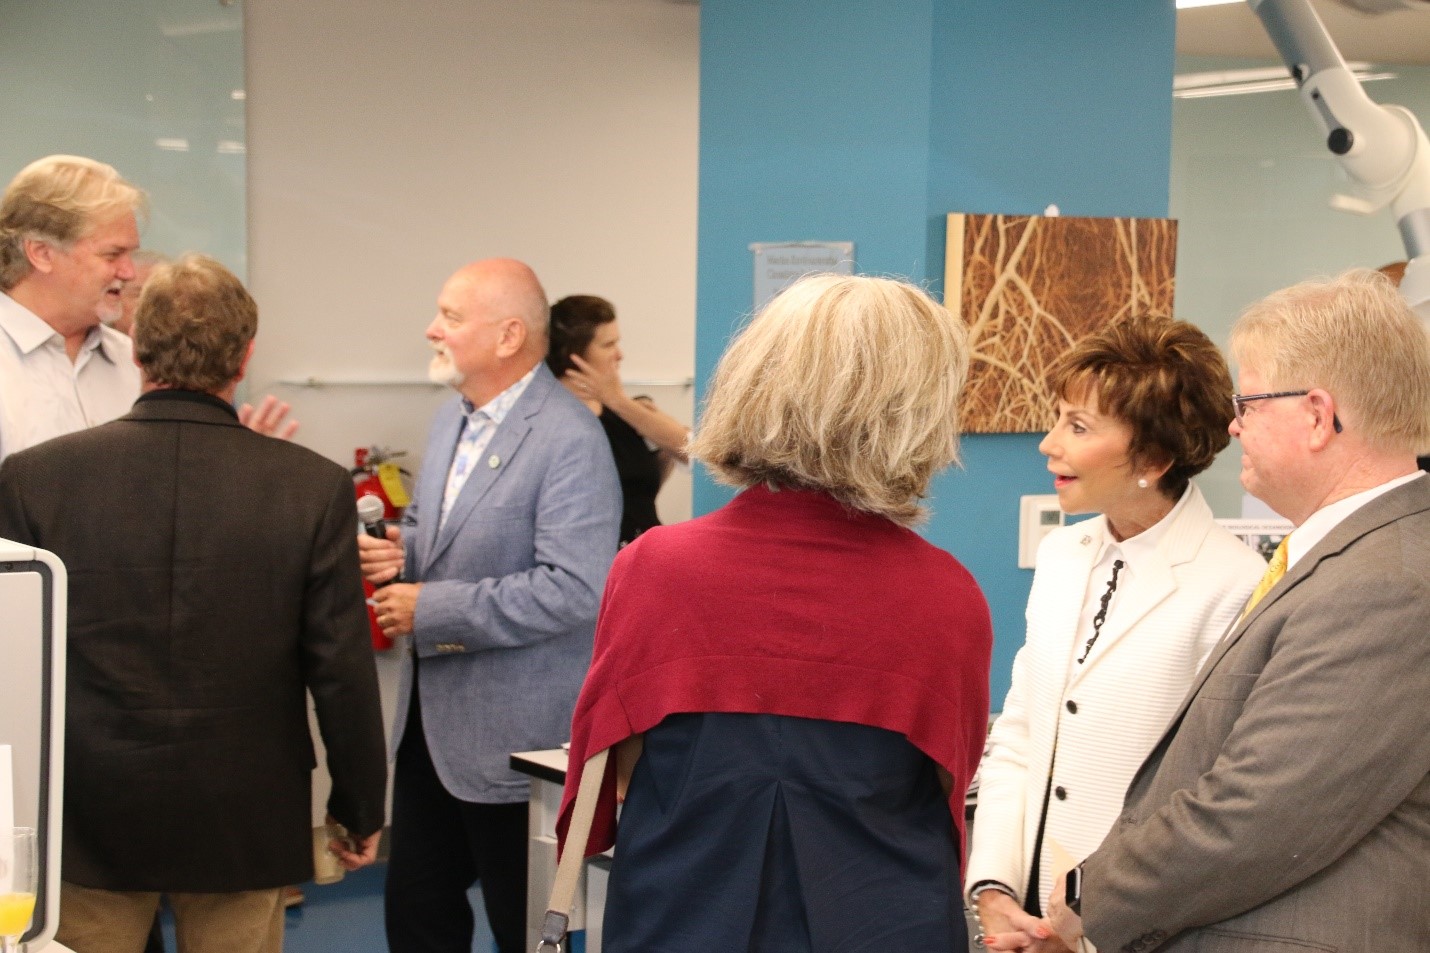 USF President Judy Genshaft (white coat, foreground) and Dr. Steve Murawski (blue coat, background) converse with other guests after giving speeches at the grand opening of the Marine Environmental Chemistry Laboratory at USF CMS. 